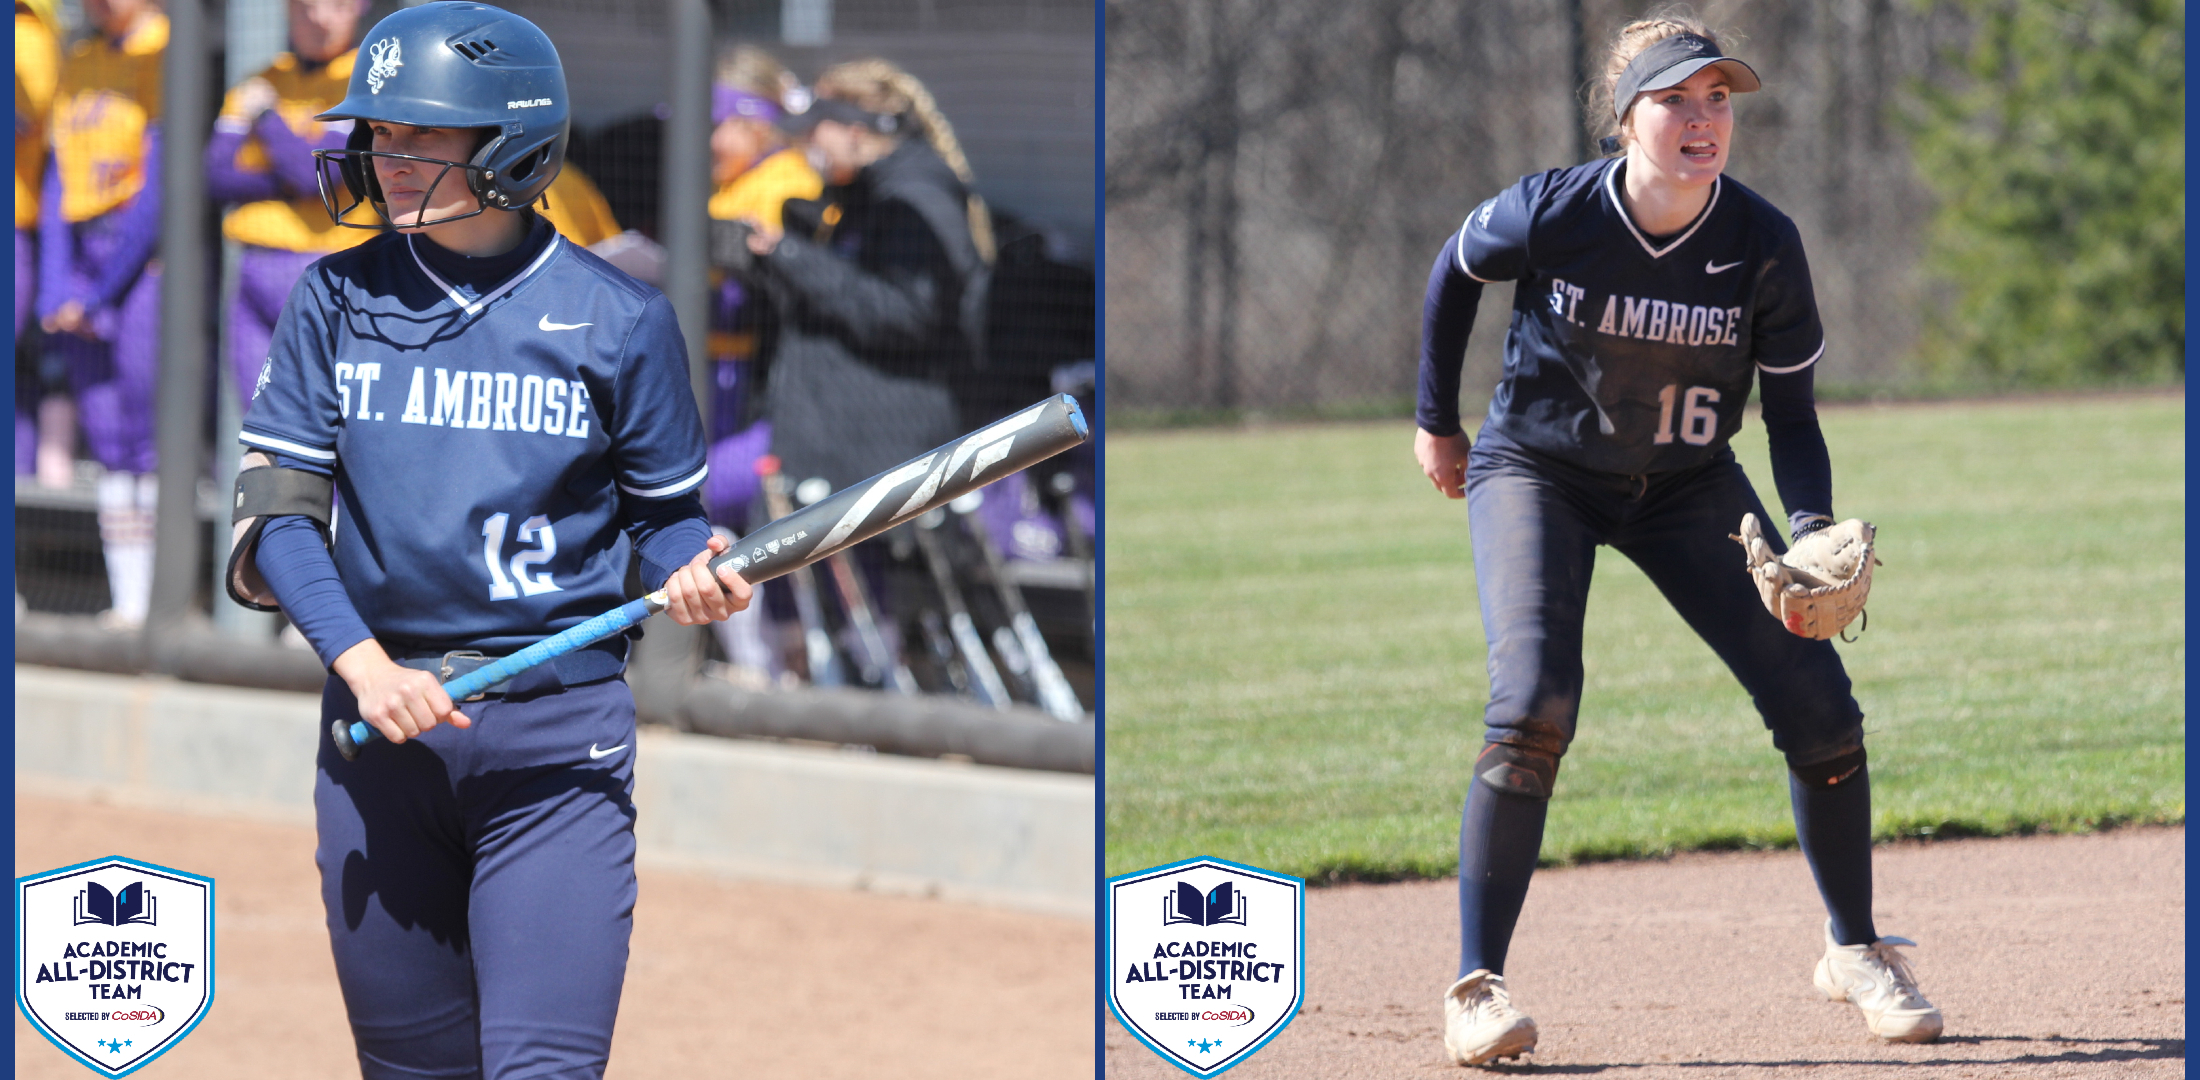 McClintock and Schumacher named to Academic All-District team